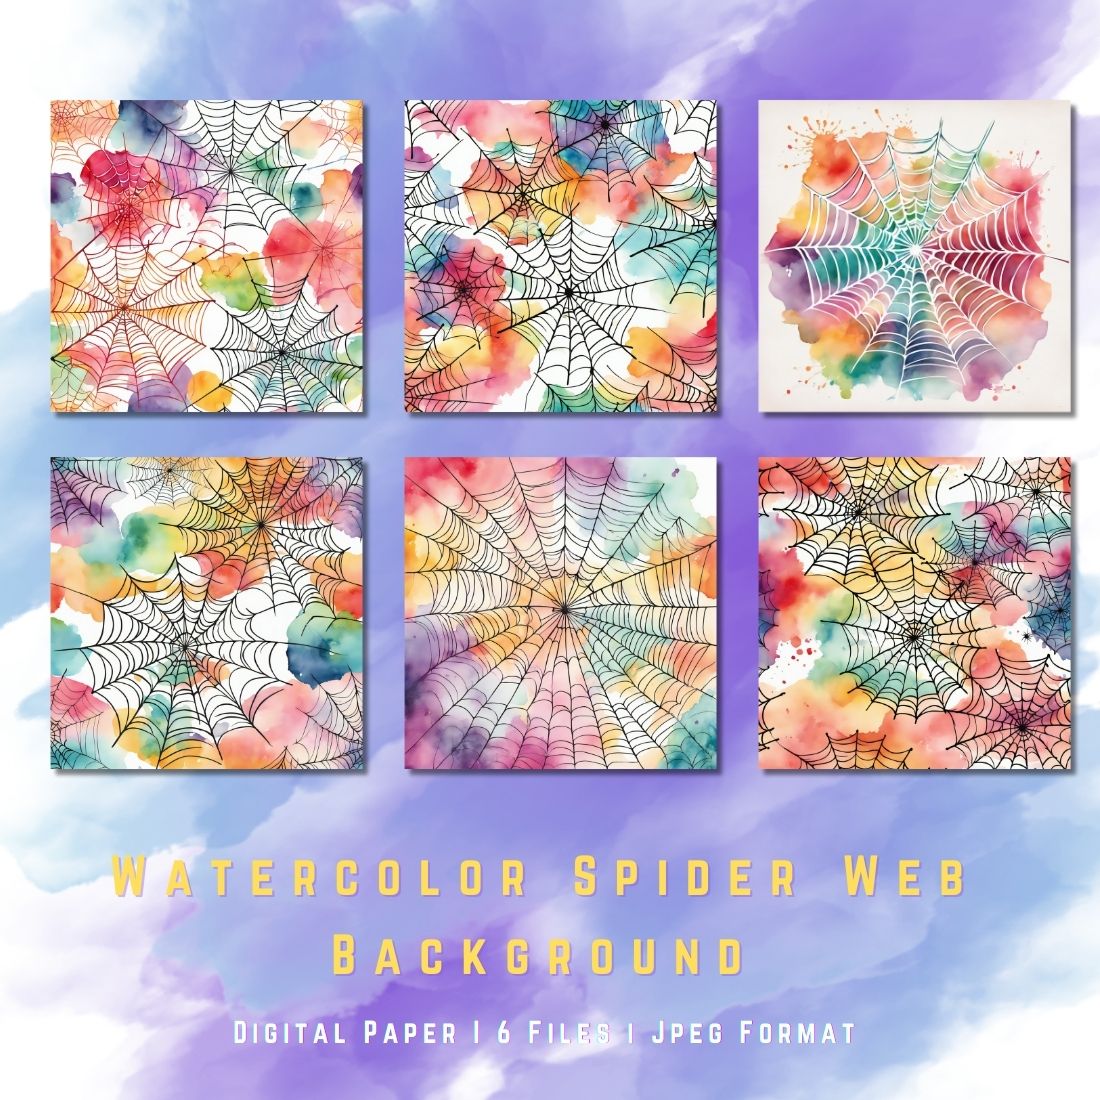 Watercolor Spider Web Digital Papers cover image.